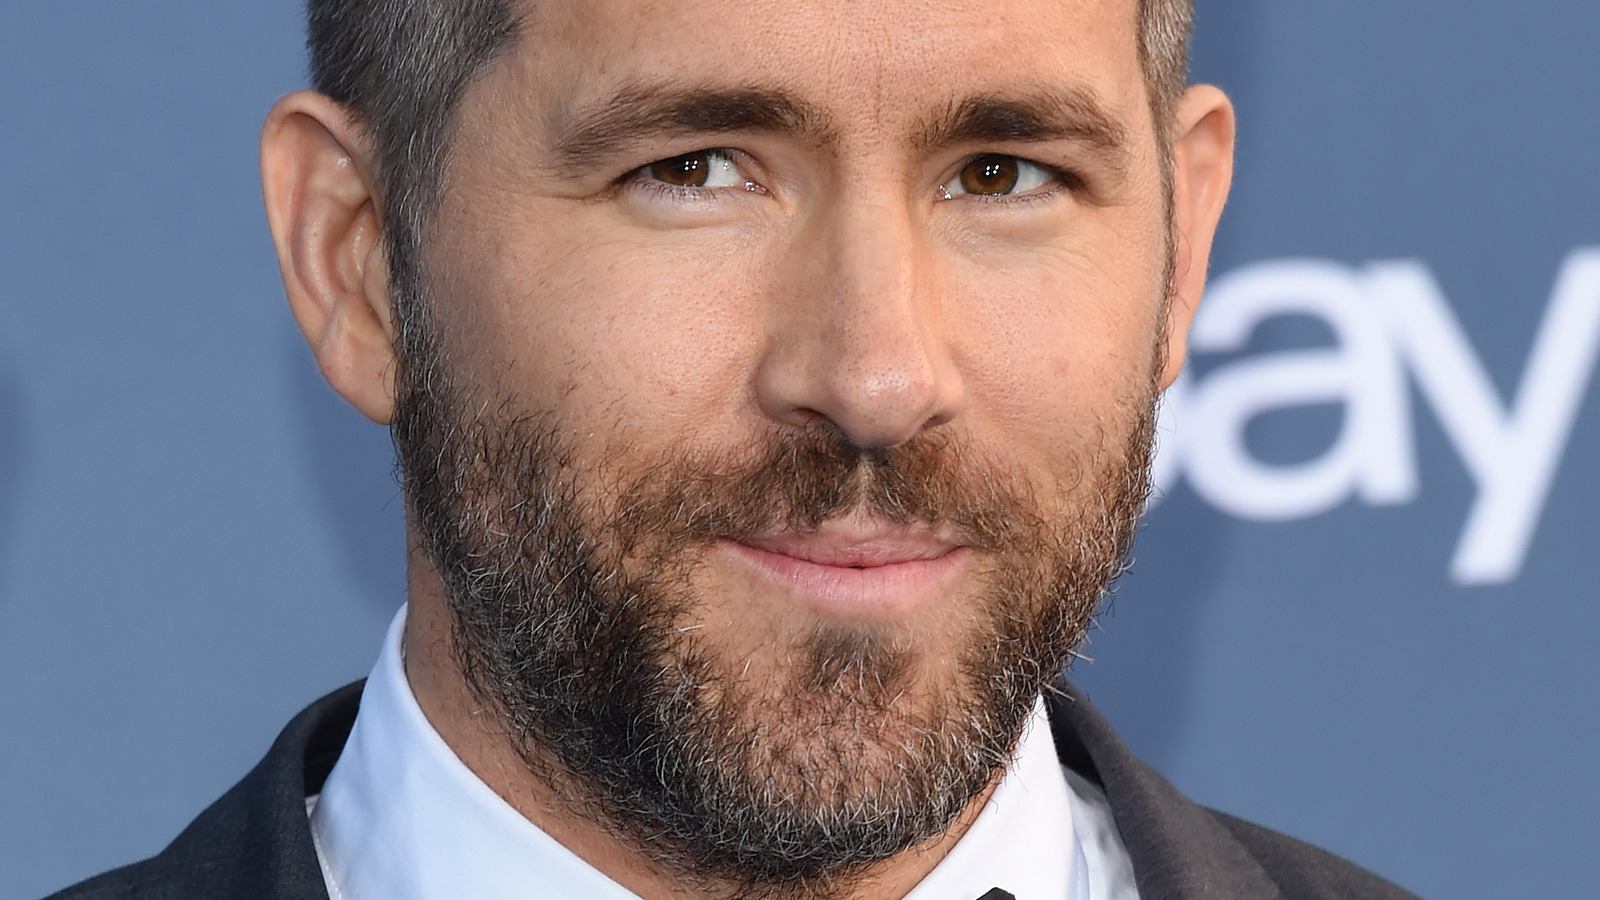 https://www.nickiswift.com/img/gallery/the-sad-reason-ryan-reynolds-takes-on-too-much-work/l-intro-1635534272.jpg